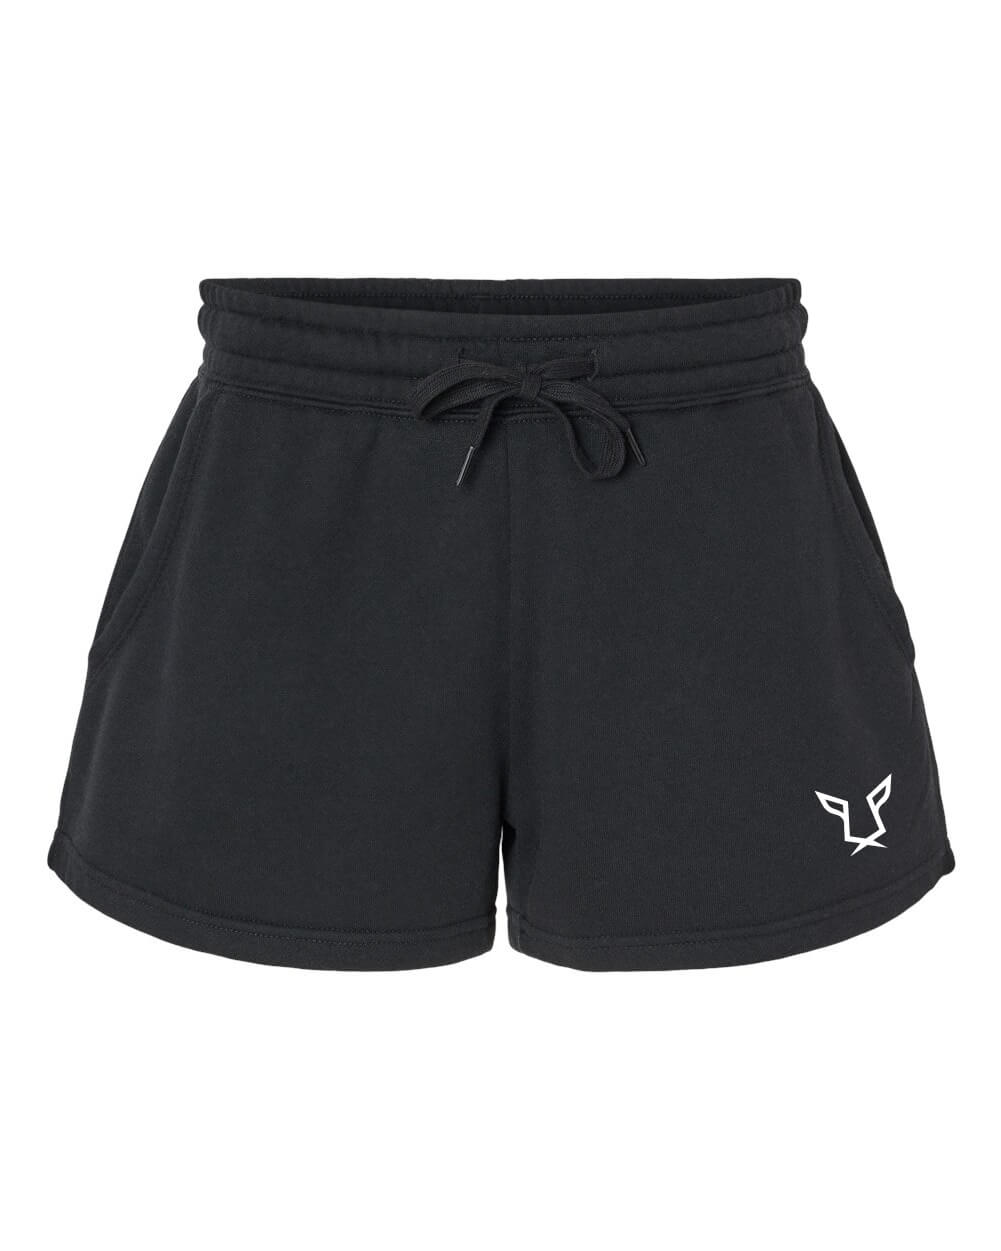 Women's Black Evolution Wave Wash Shorts by Odisi Apparel